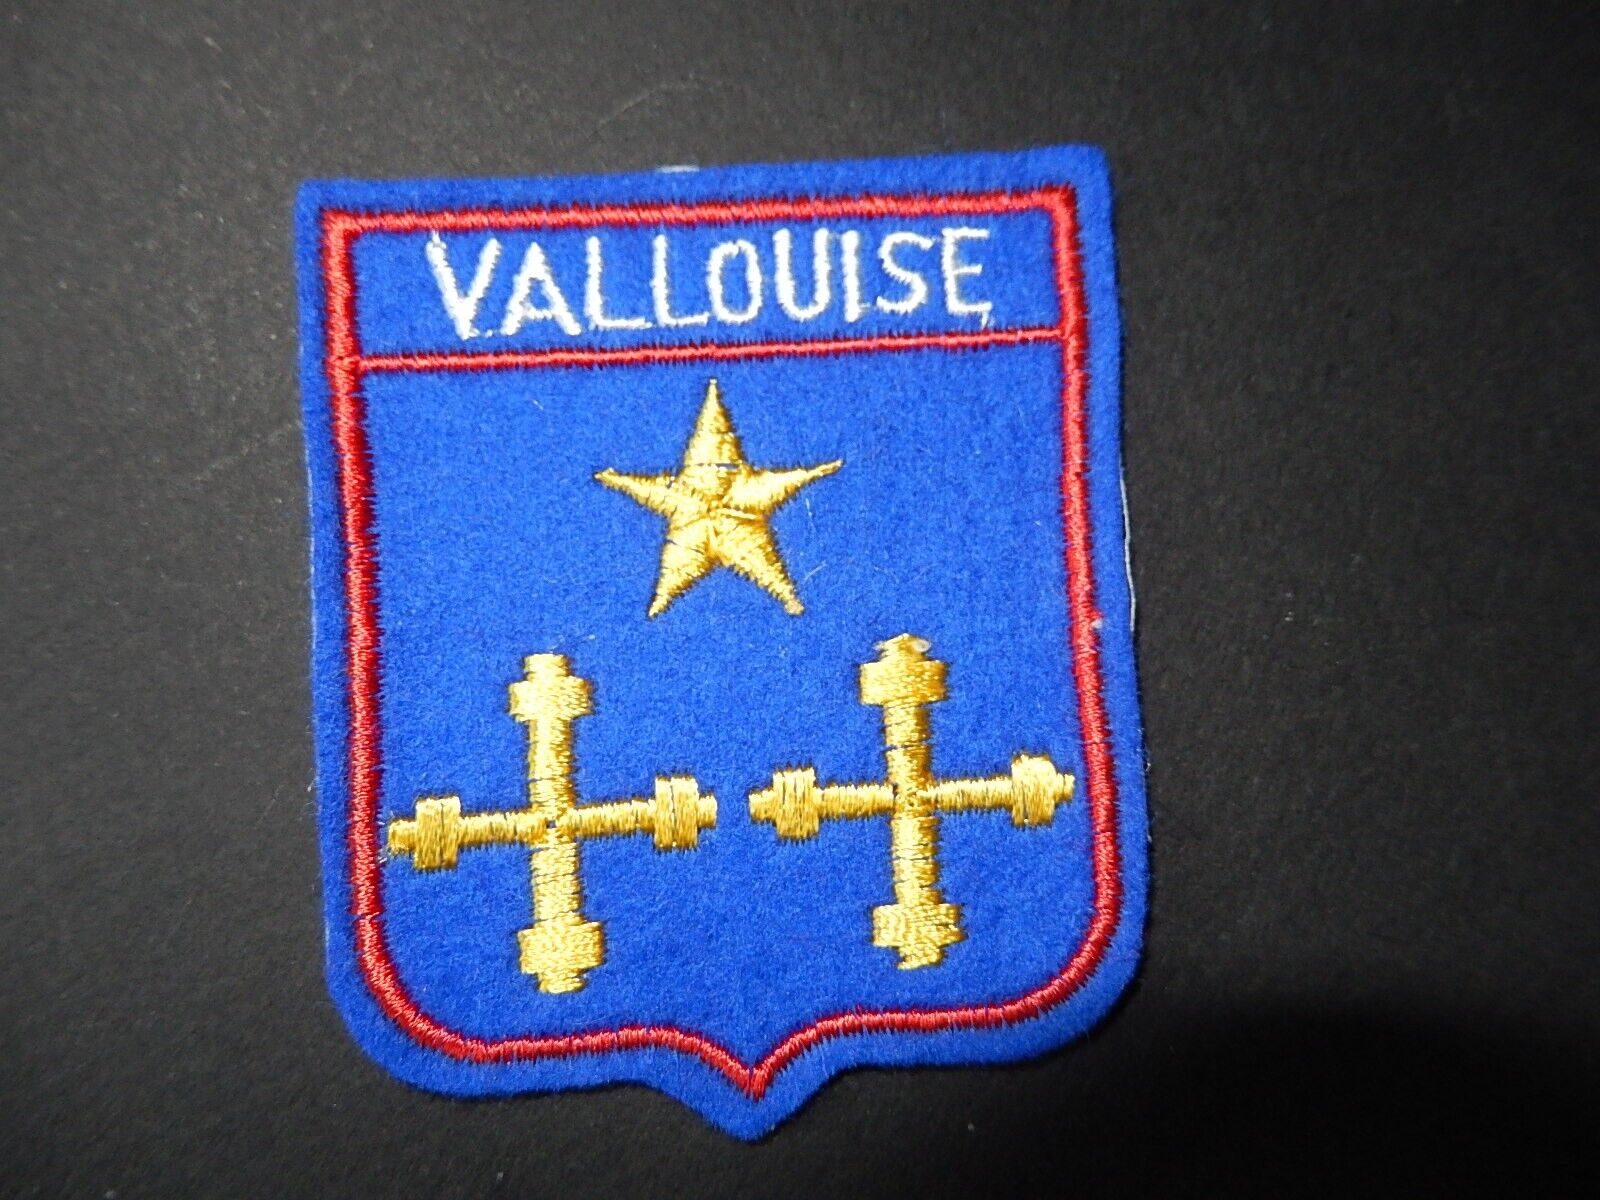 VALLOUISE PELVOUX ALPES CROSS STAR EMBROIDERY FABRIC PATCH CUSHION